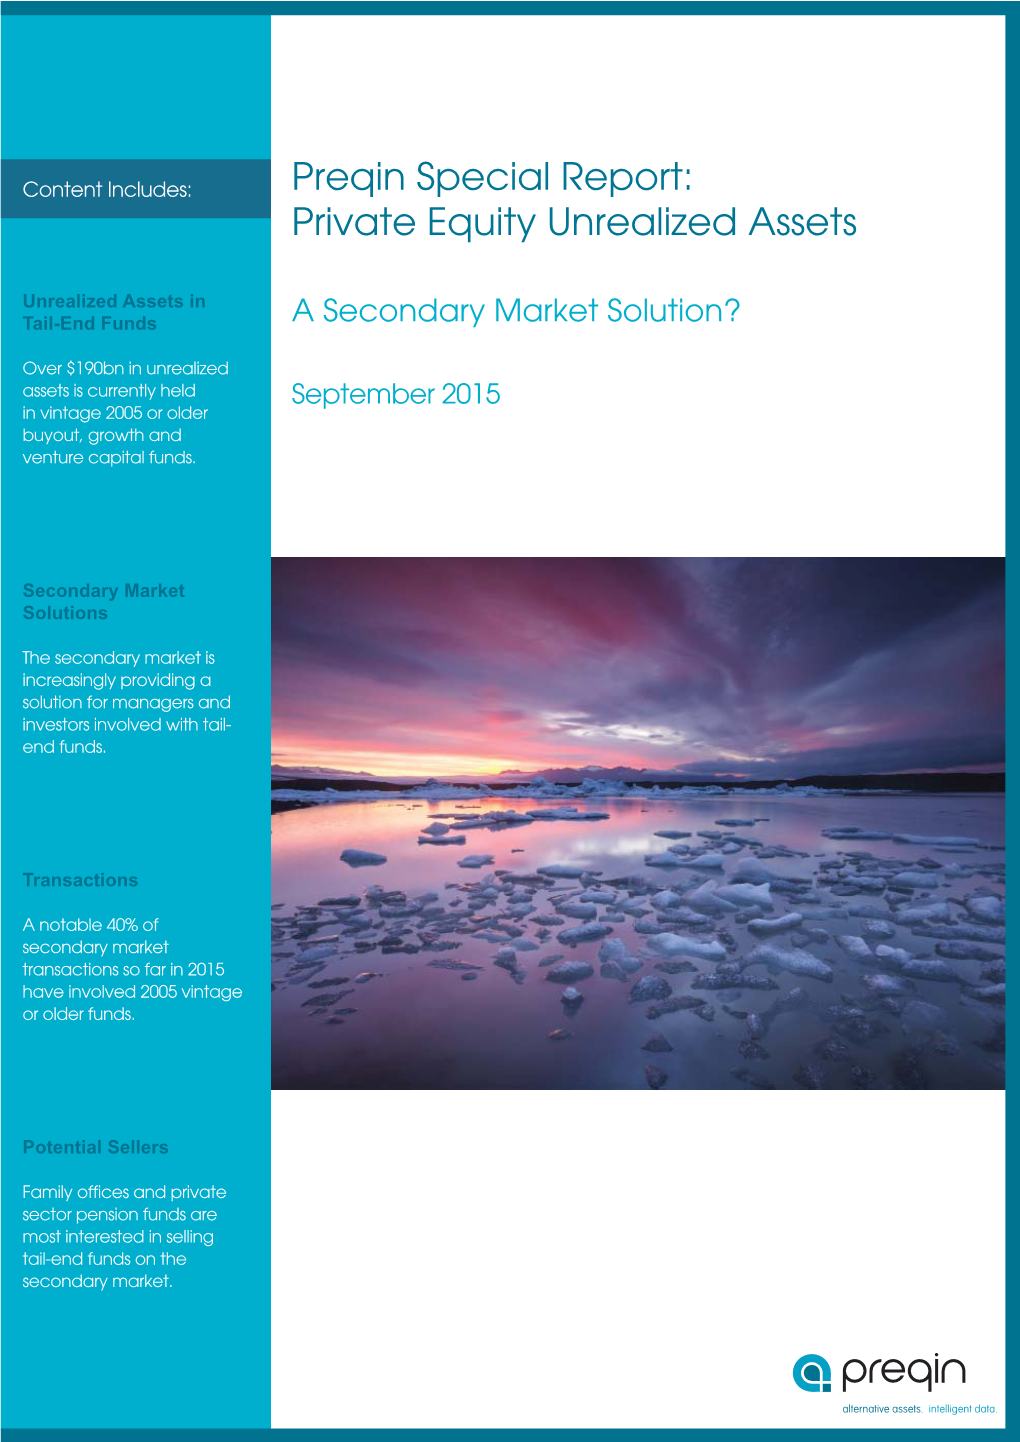 Preqin Special Report: Private Equity Unrealized Assets